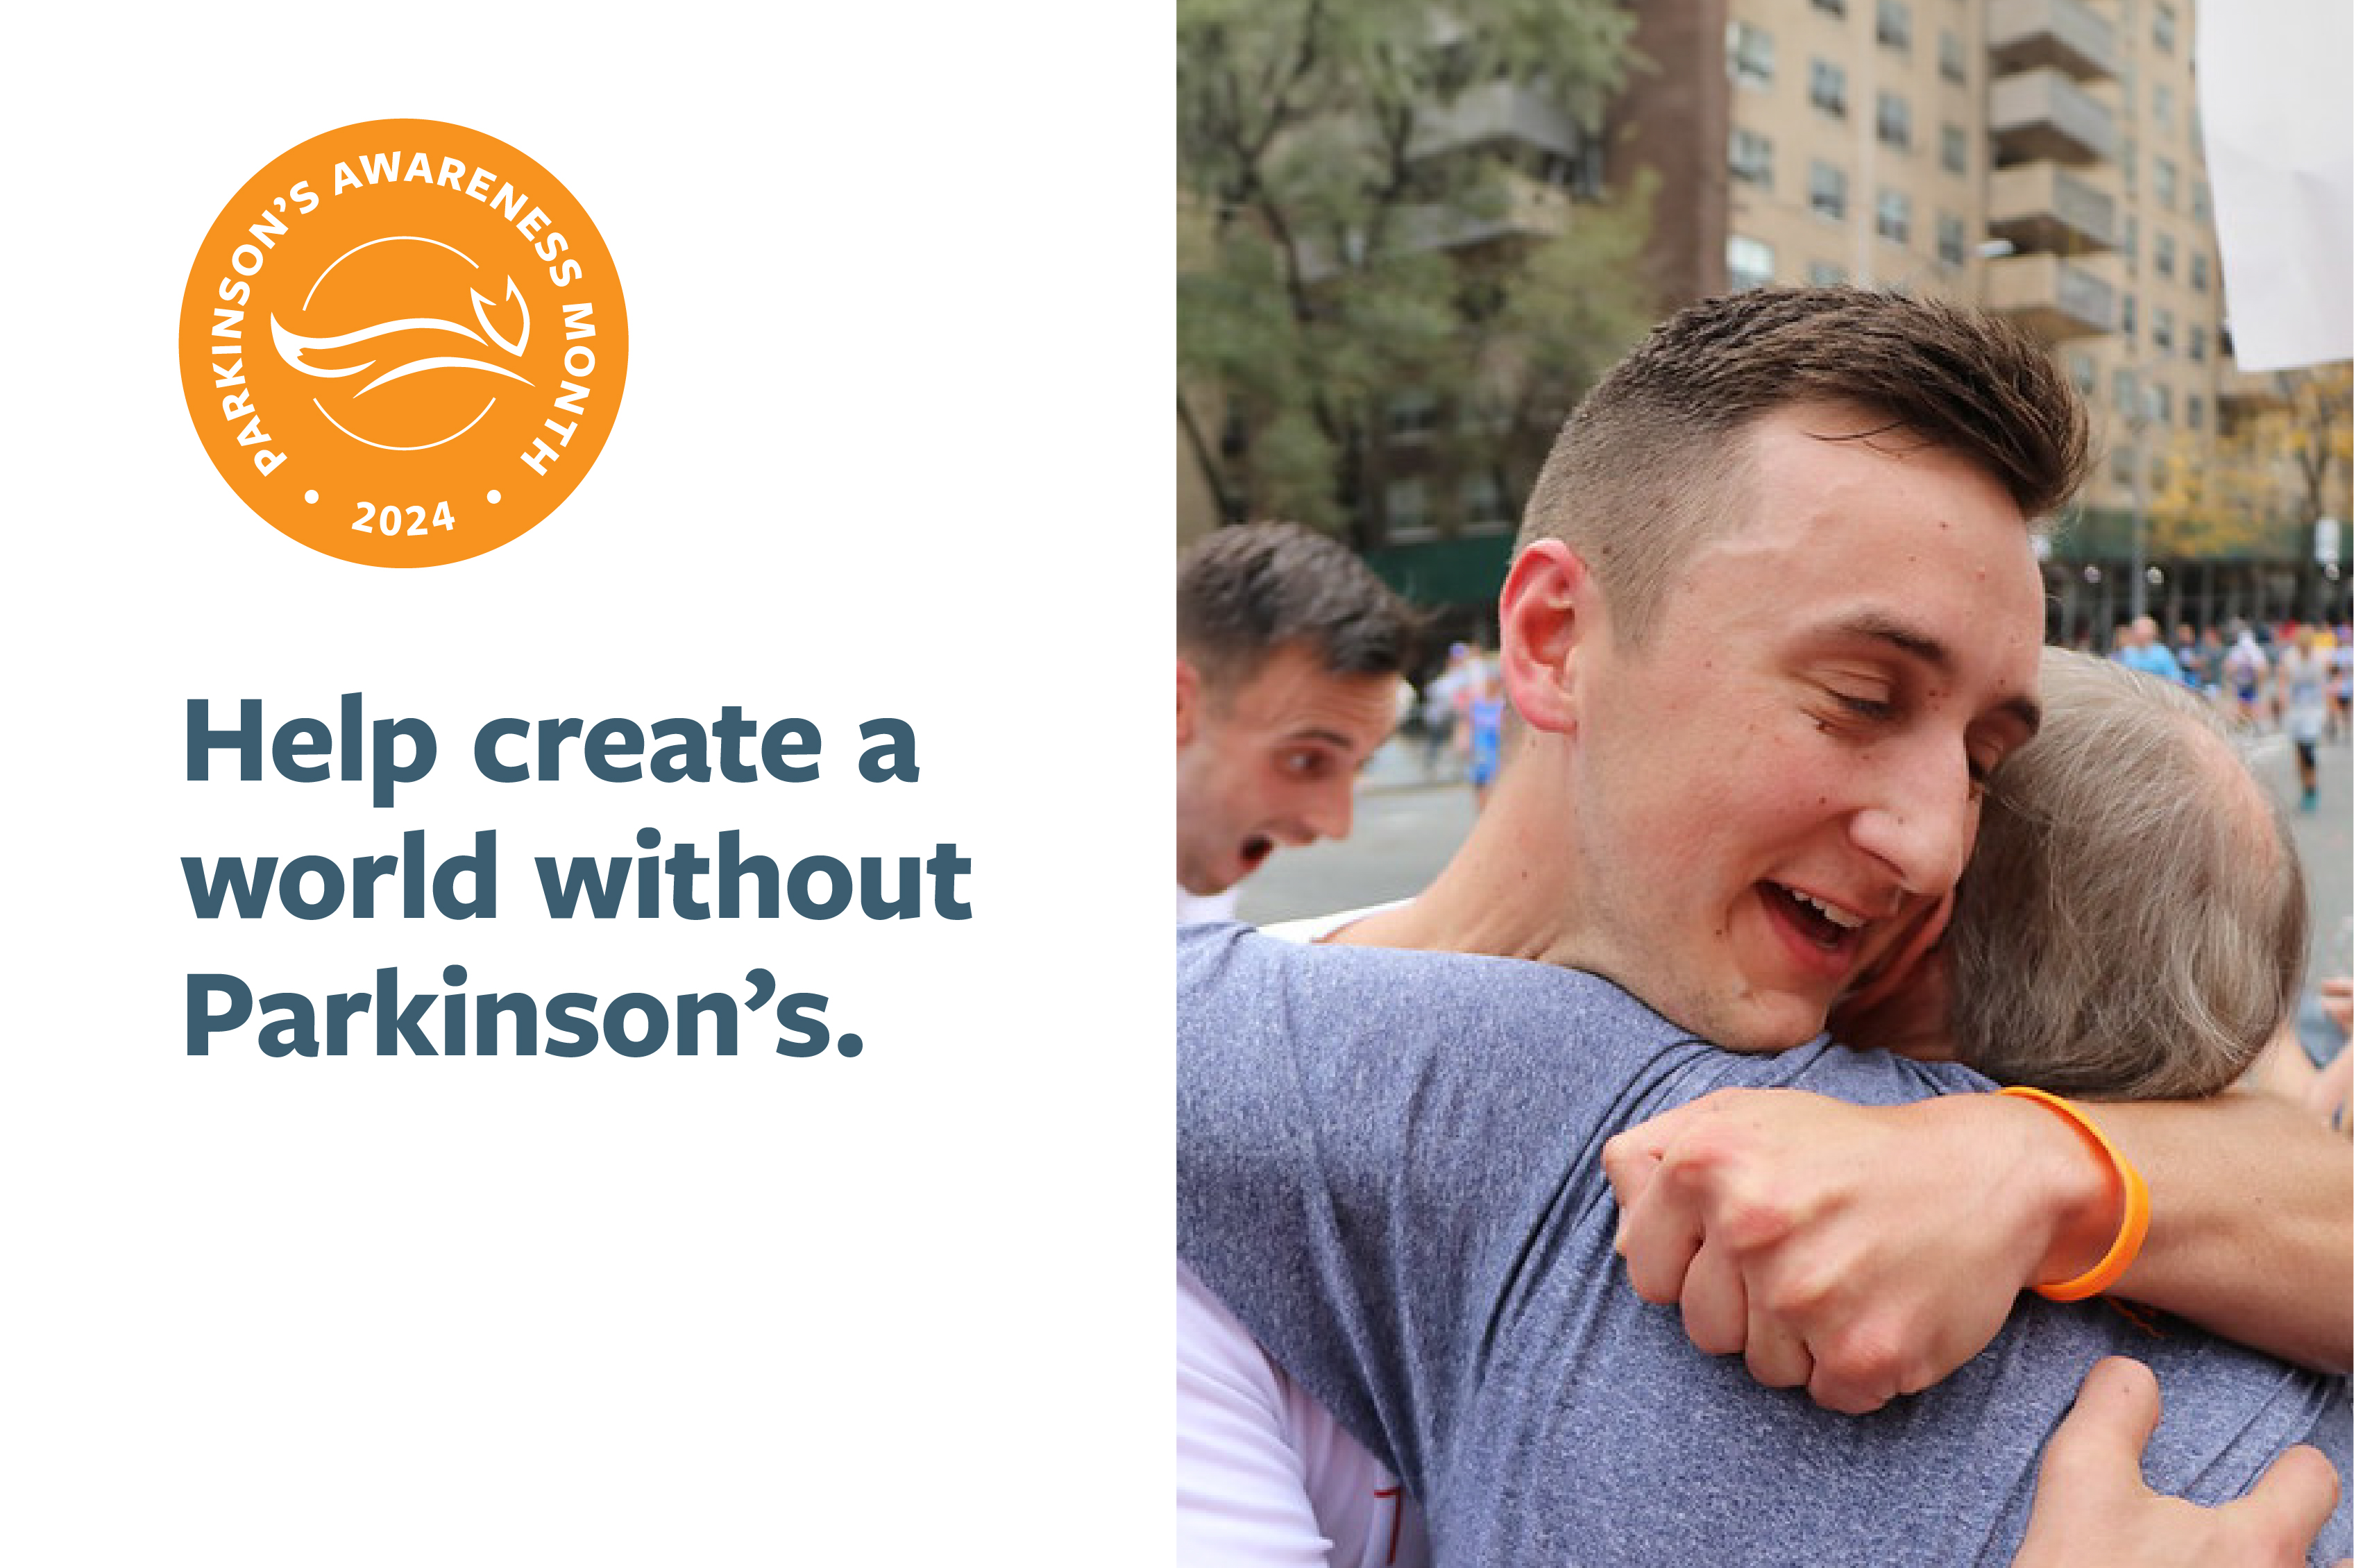 Help create a world without Parkinson's.